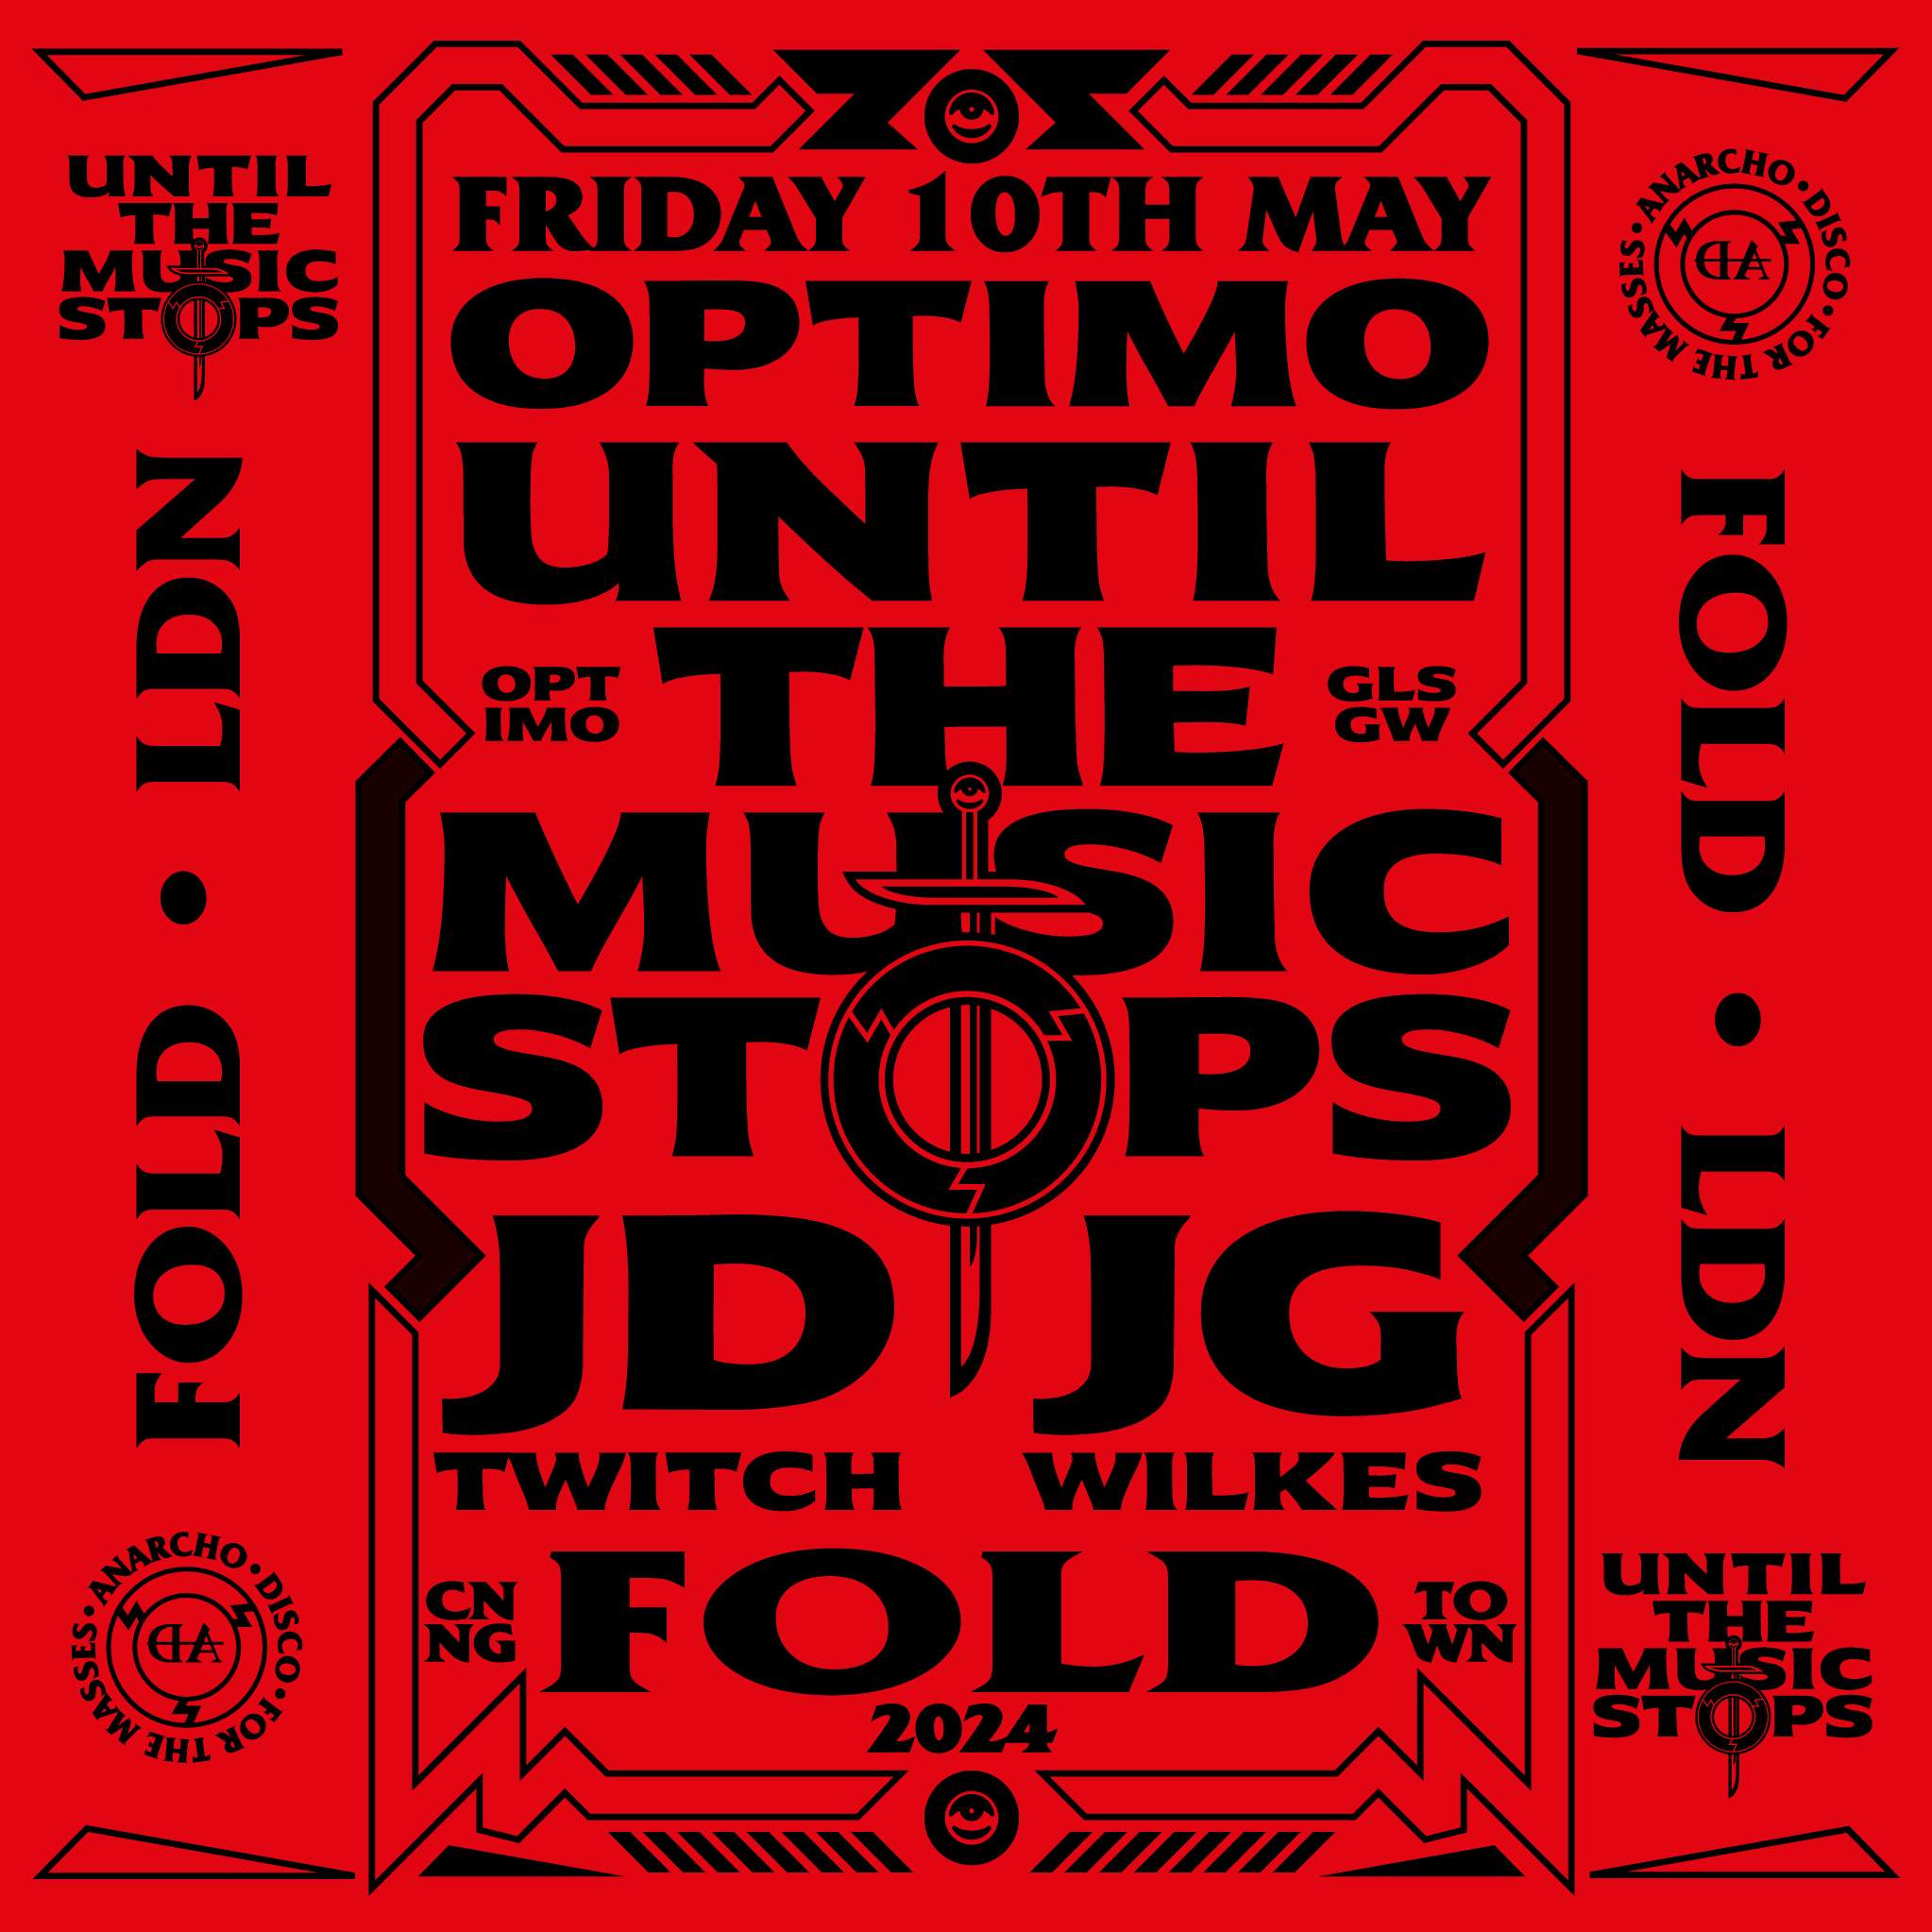 Until The Music Stops >>> Optimo (Espacio) / All Night Long / FOLD - Flyer front